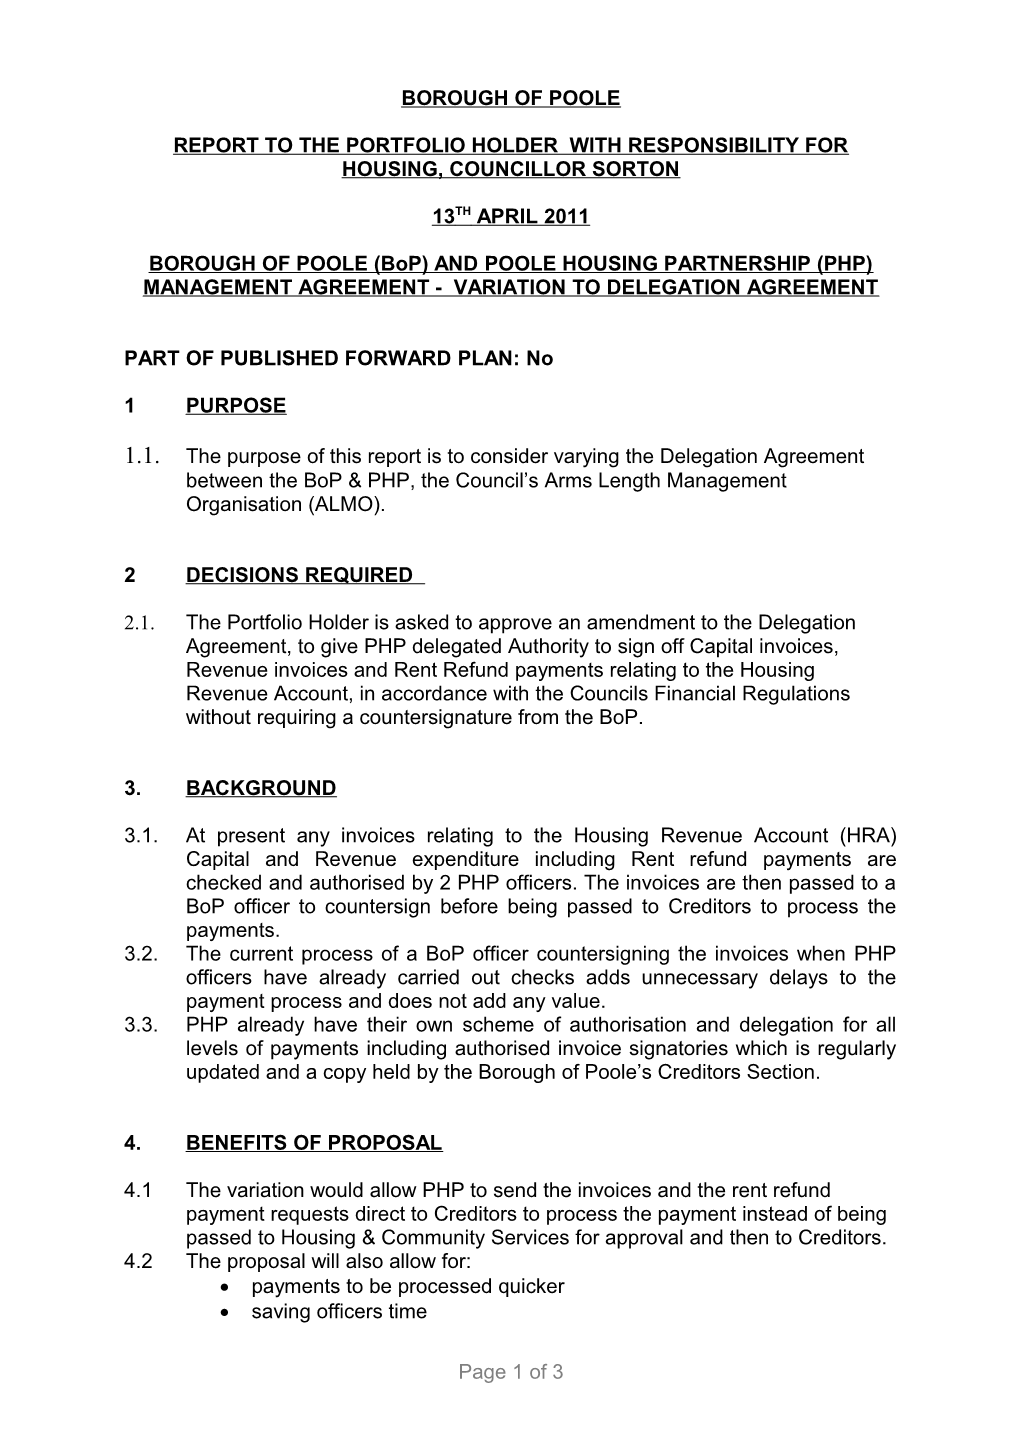 Borough of Poole (Bop) and Poole Housing Partnership (PHP) Management Agreement - Variation